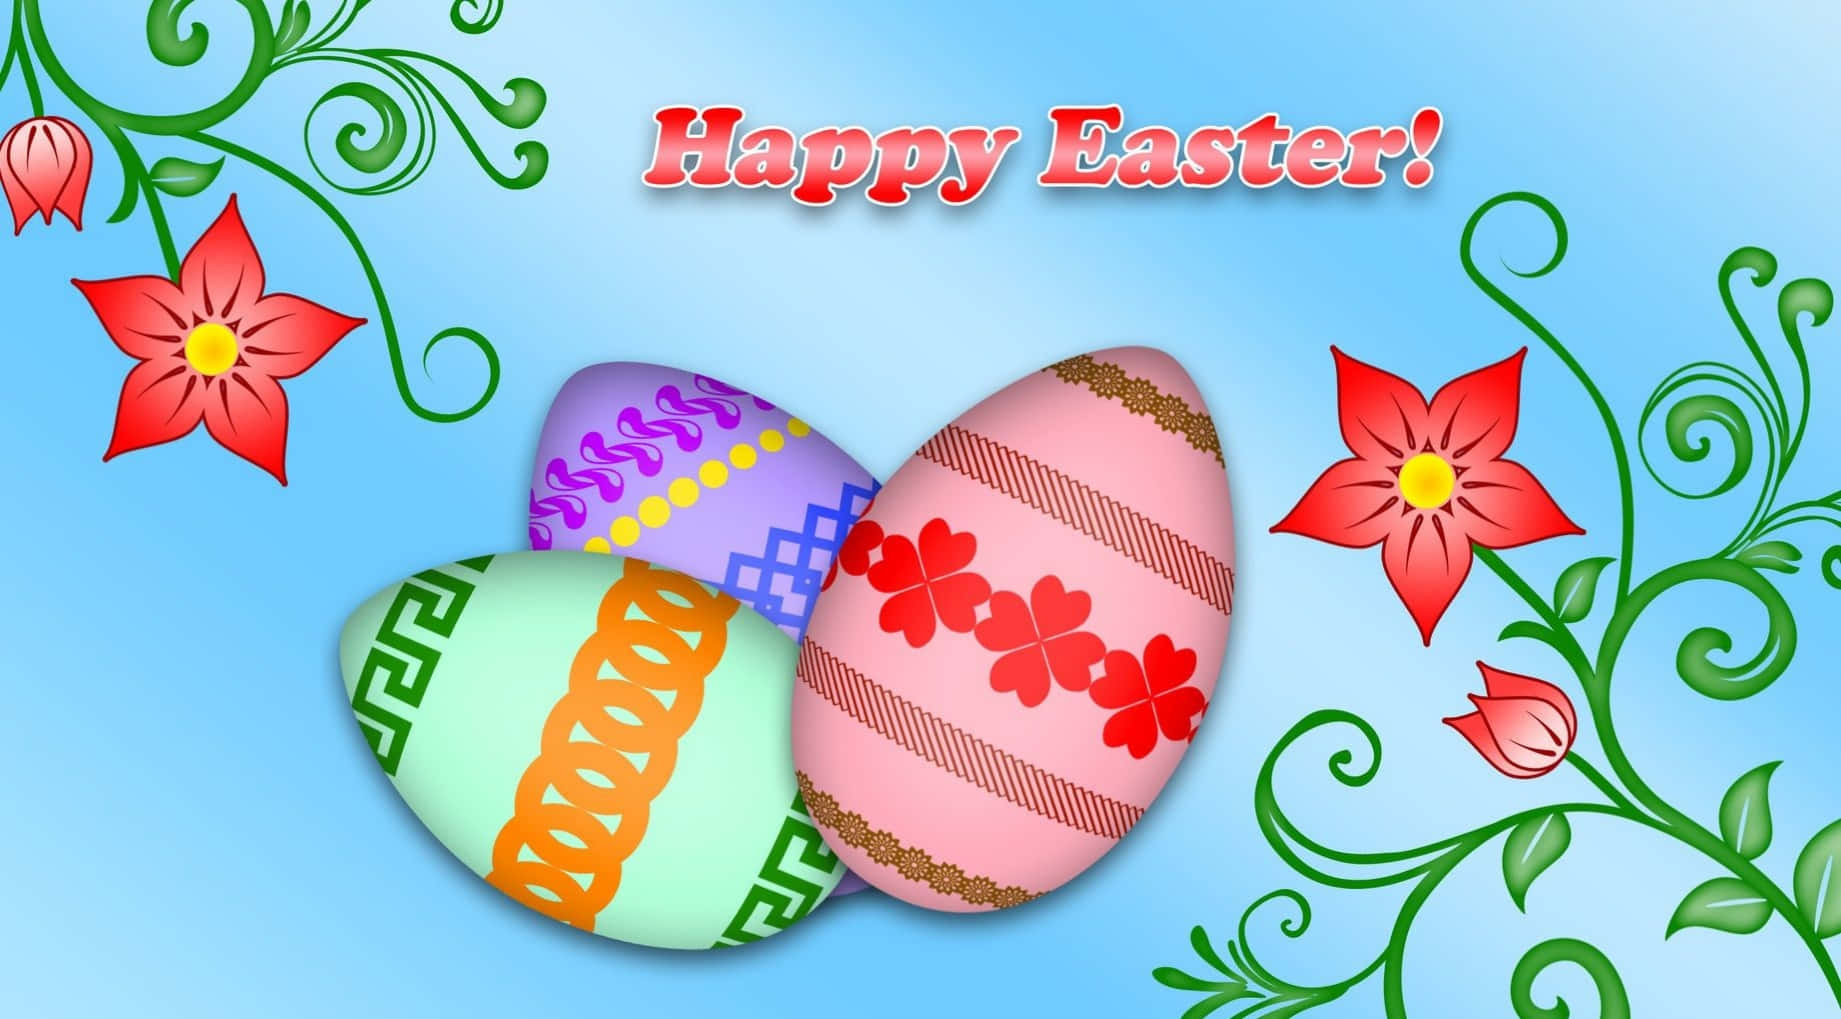 Wishing You A Very Happy Easter!